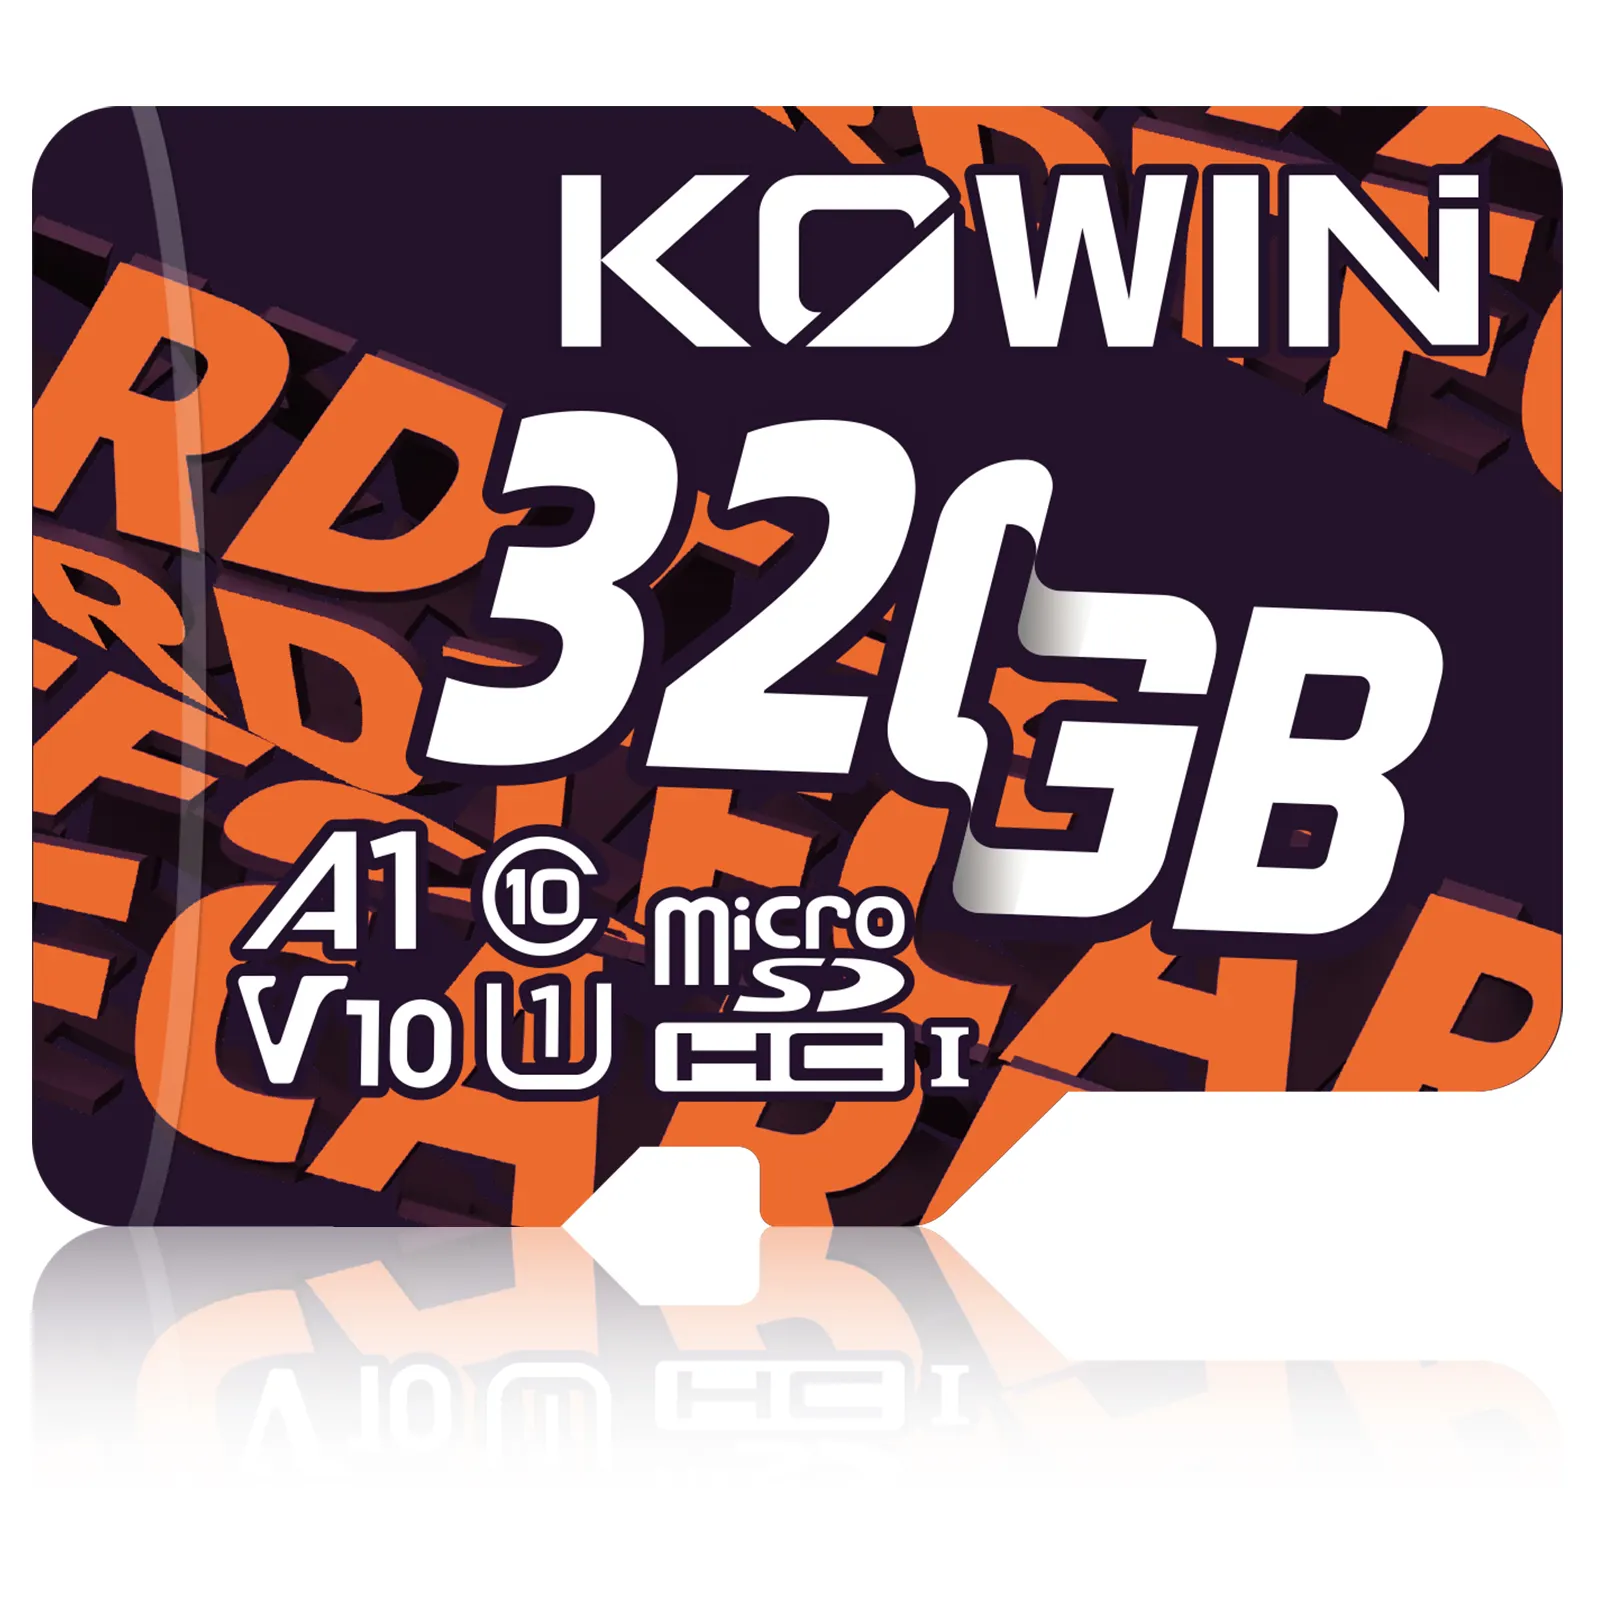 KOWIN 100MB/s CT100 micro SD Flash Memory Cards 32GB 64GB C10 U1 V10 A1 for mobile phones speakers tablets camera monitors